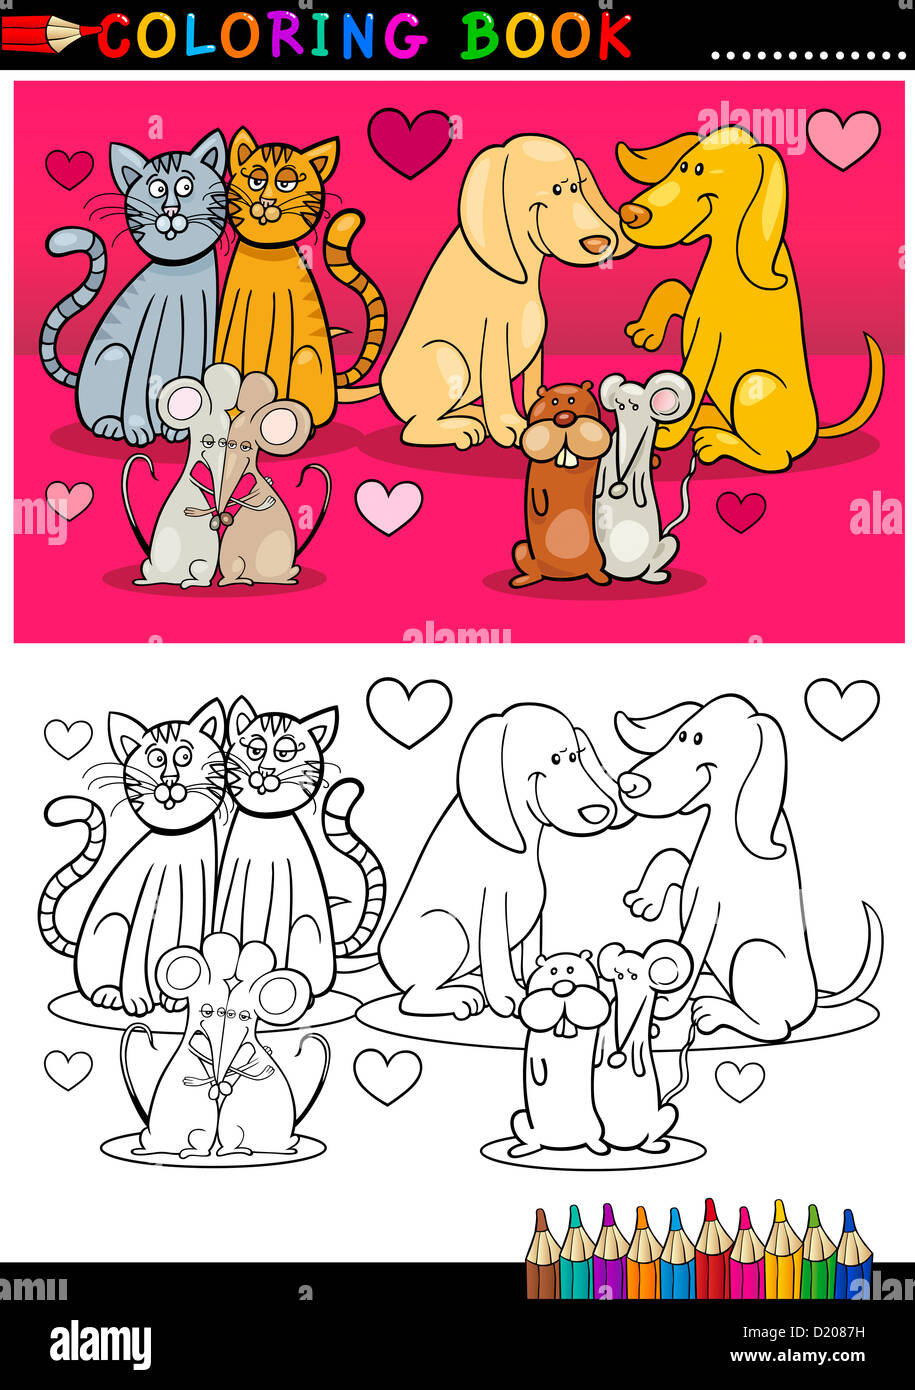 Valentine's Day Themes of Animals or Pets in Love Colorful and Black and White Cartoon Illustrations for Coloring Book Stock Photo